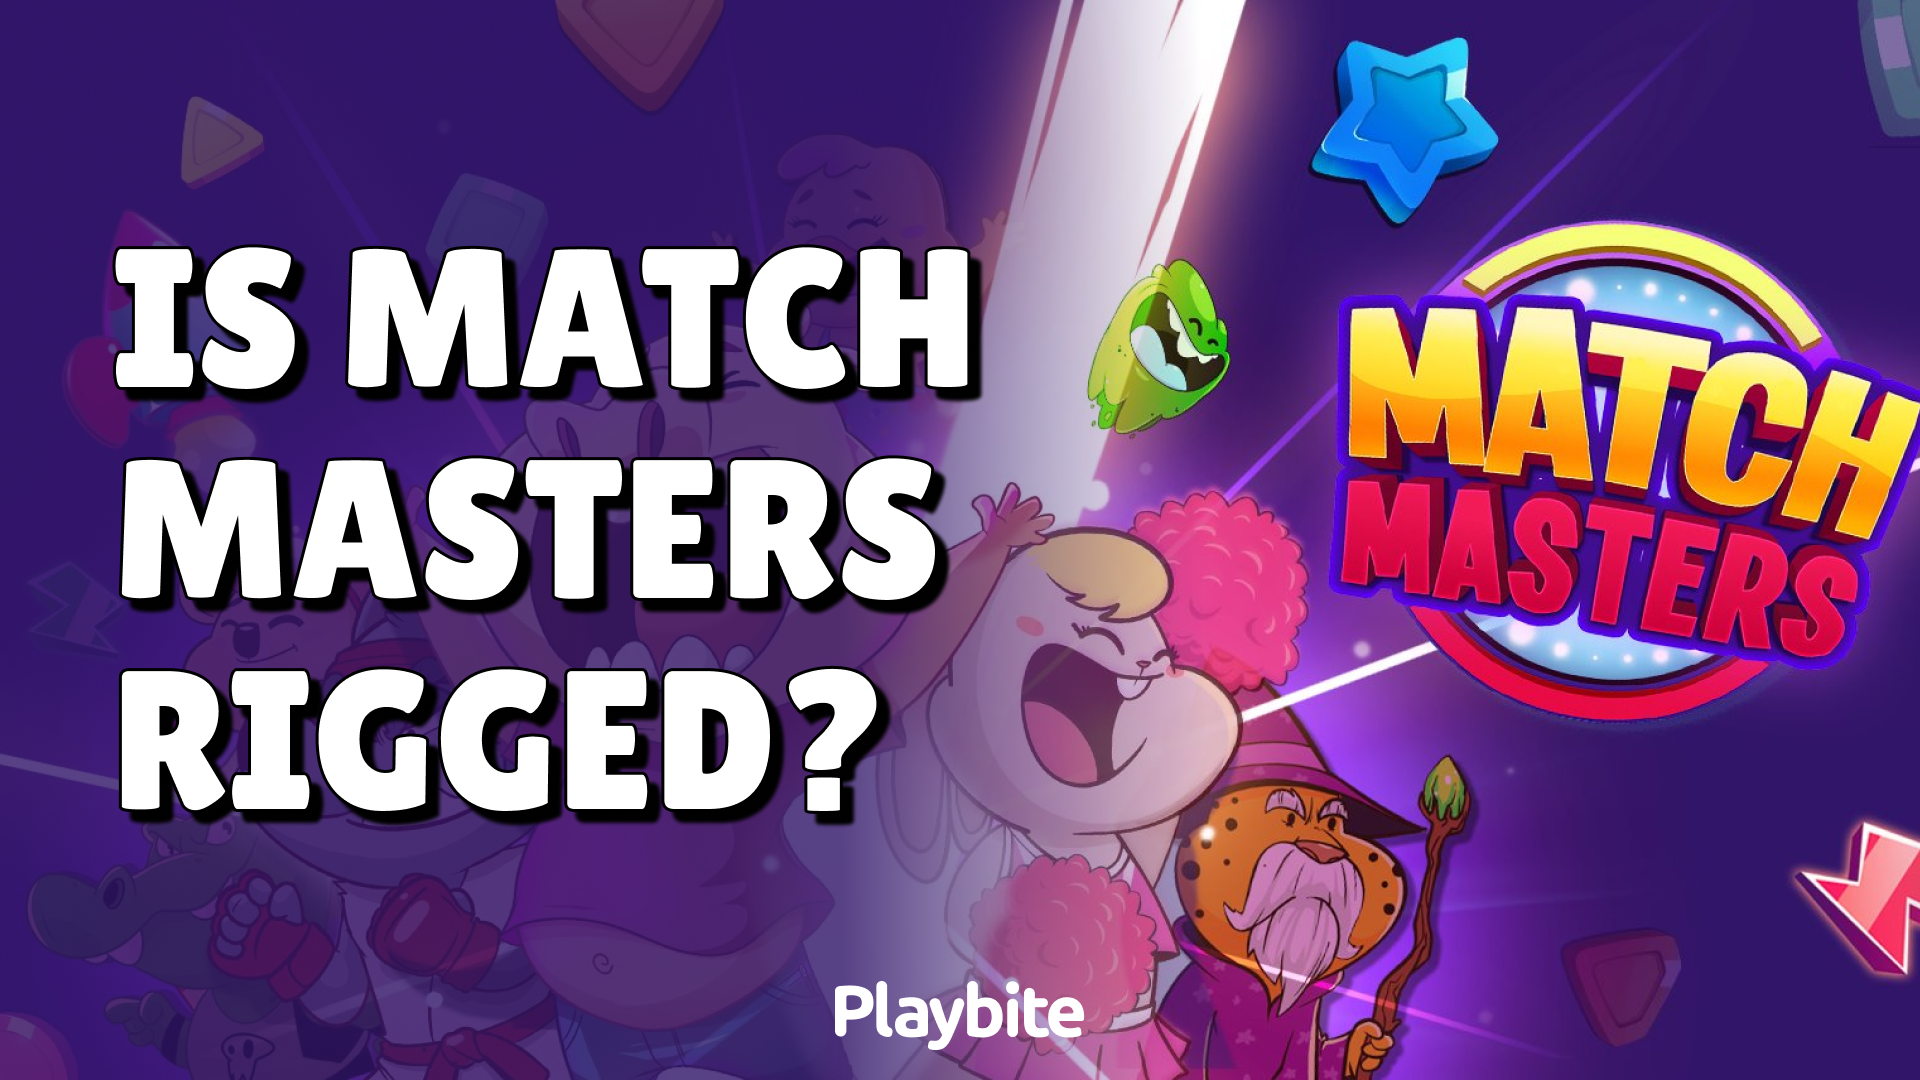 Is Match Masters Rigged?